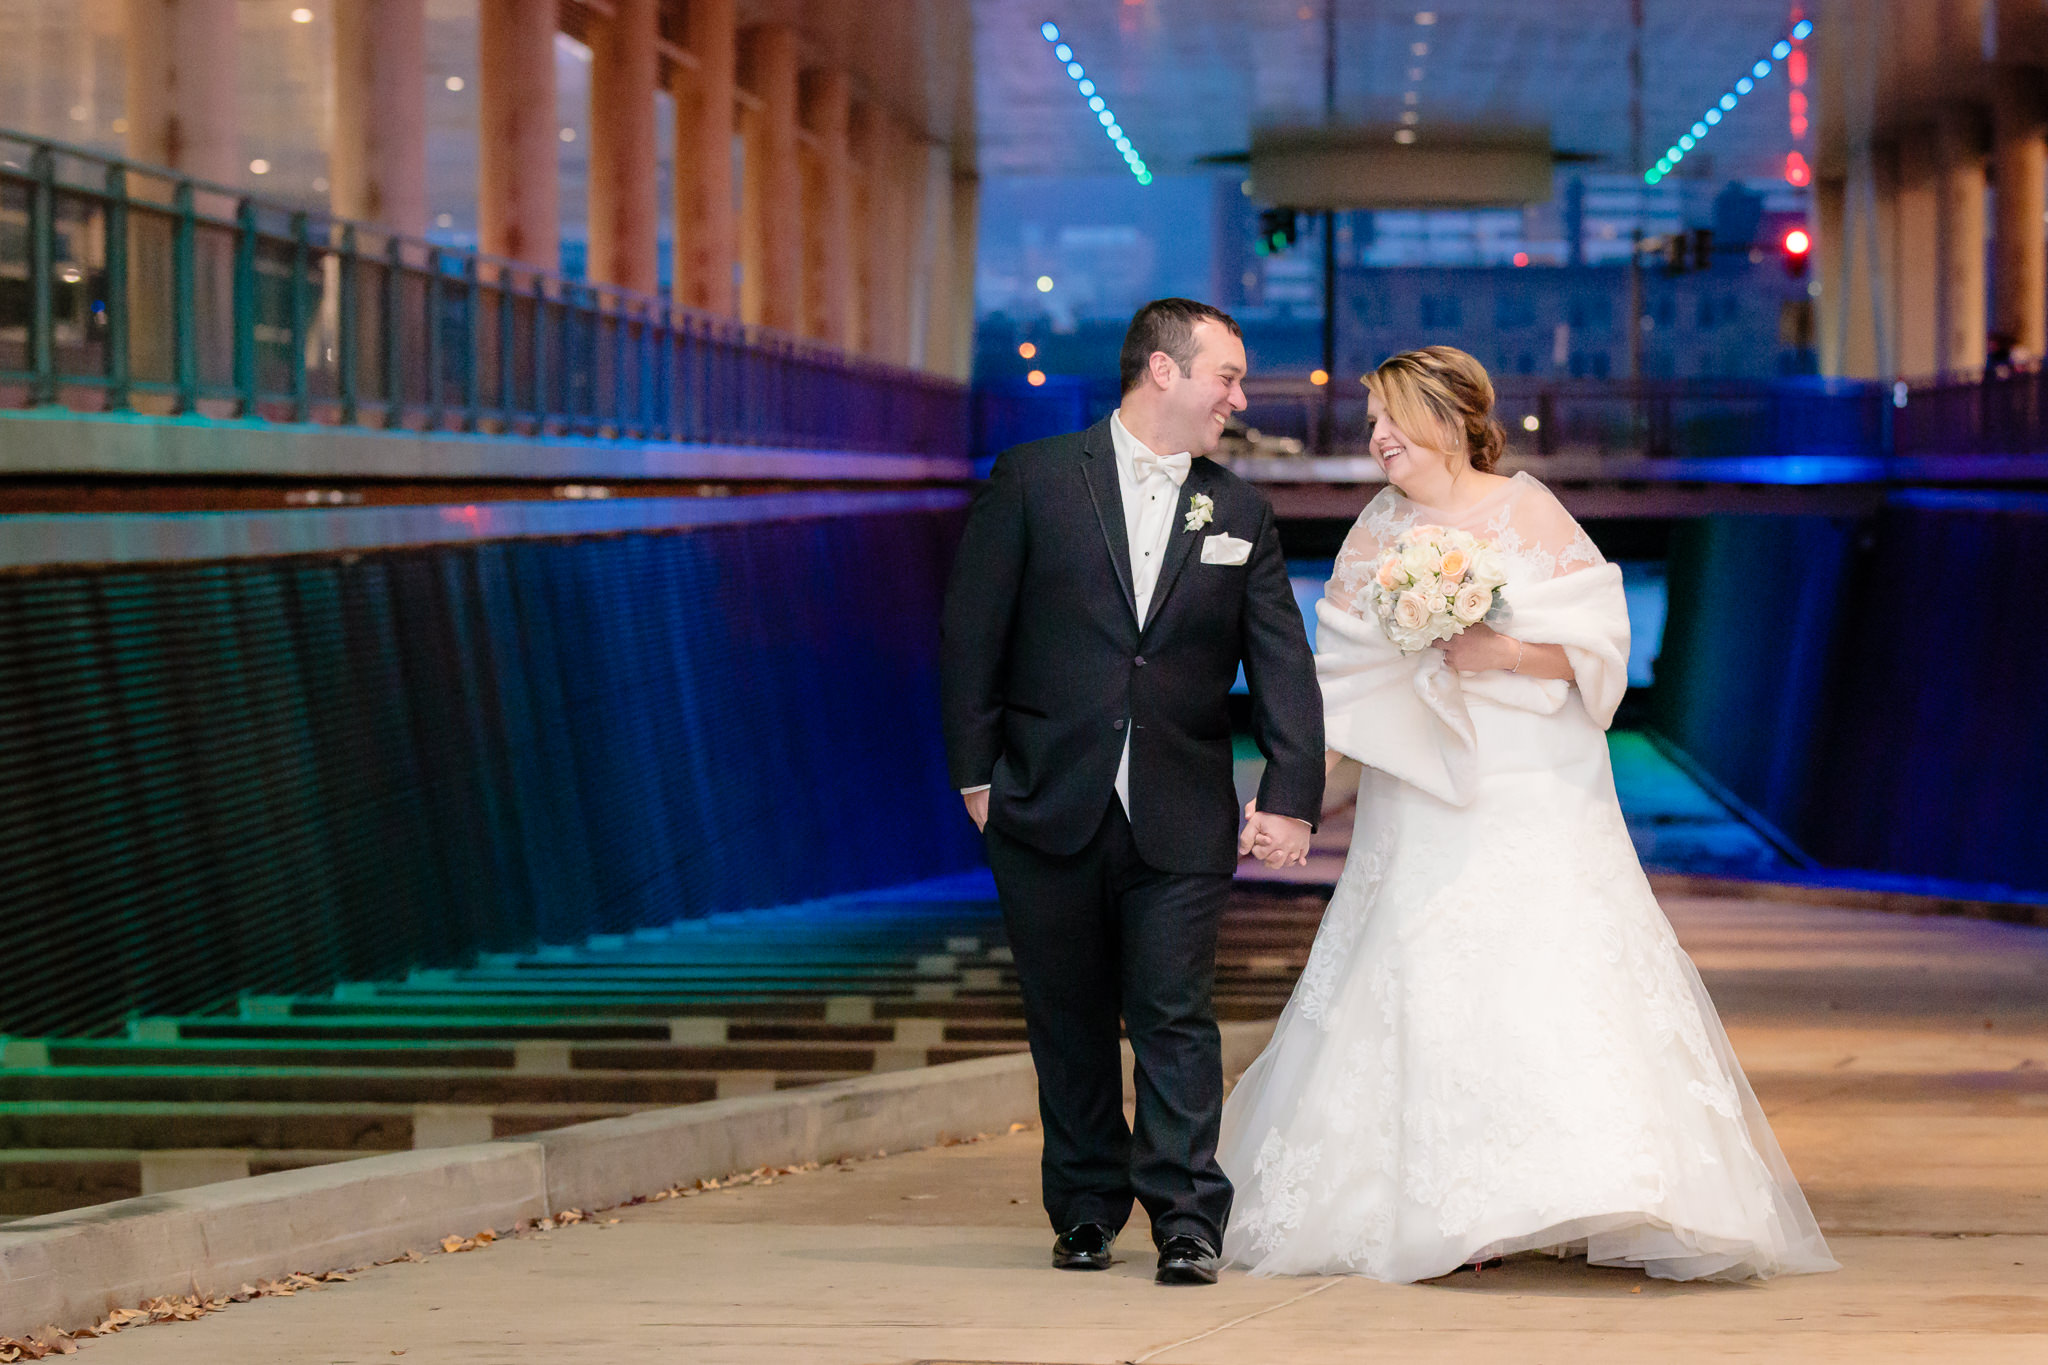 Newlyweds laugh as they walk through the colorful David L. Lawrence Convention Center walkway